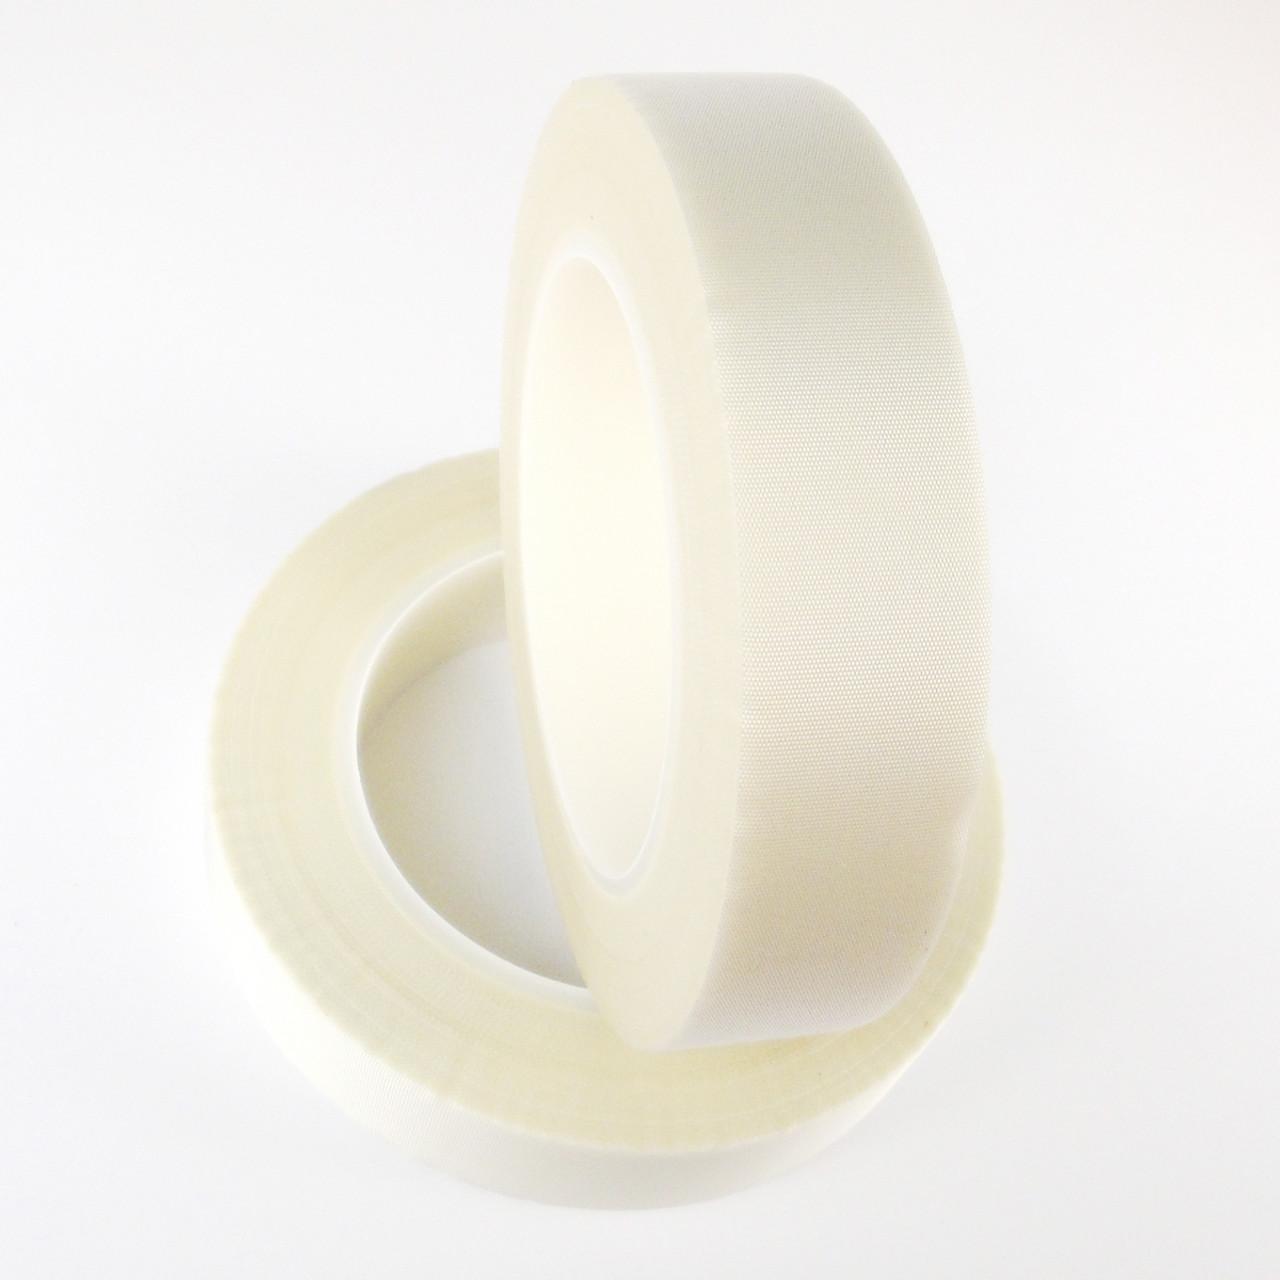 Thermal Spray Masking Tape from Tape Jungle.